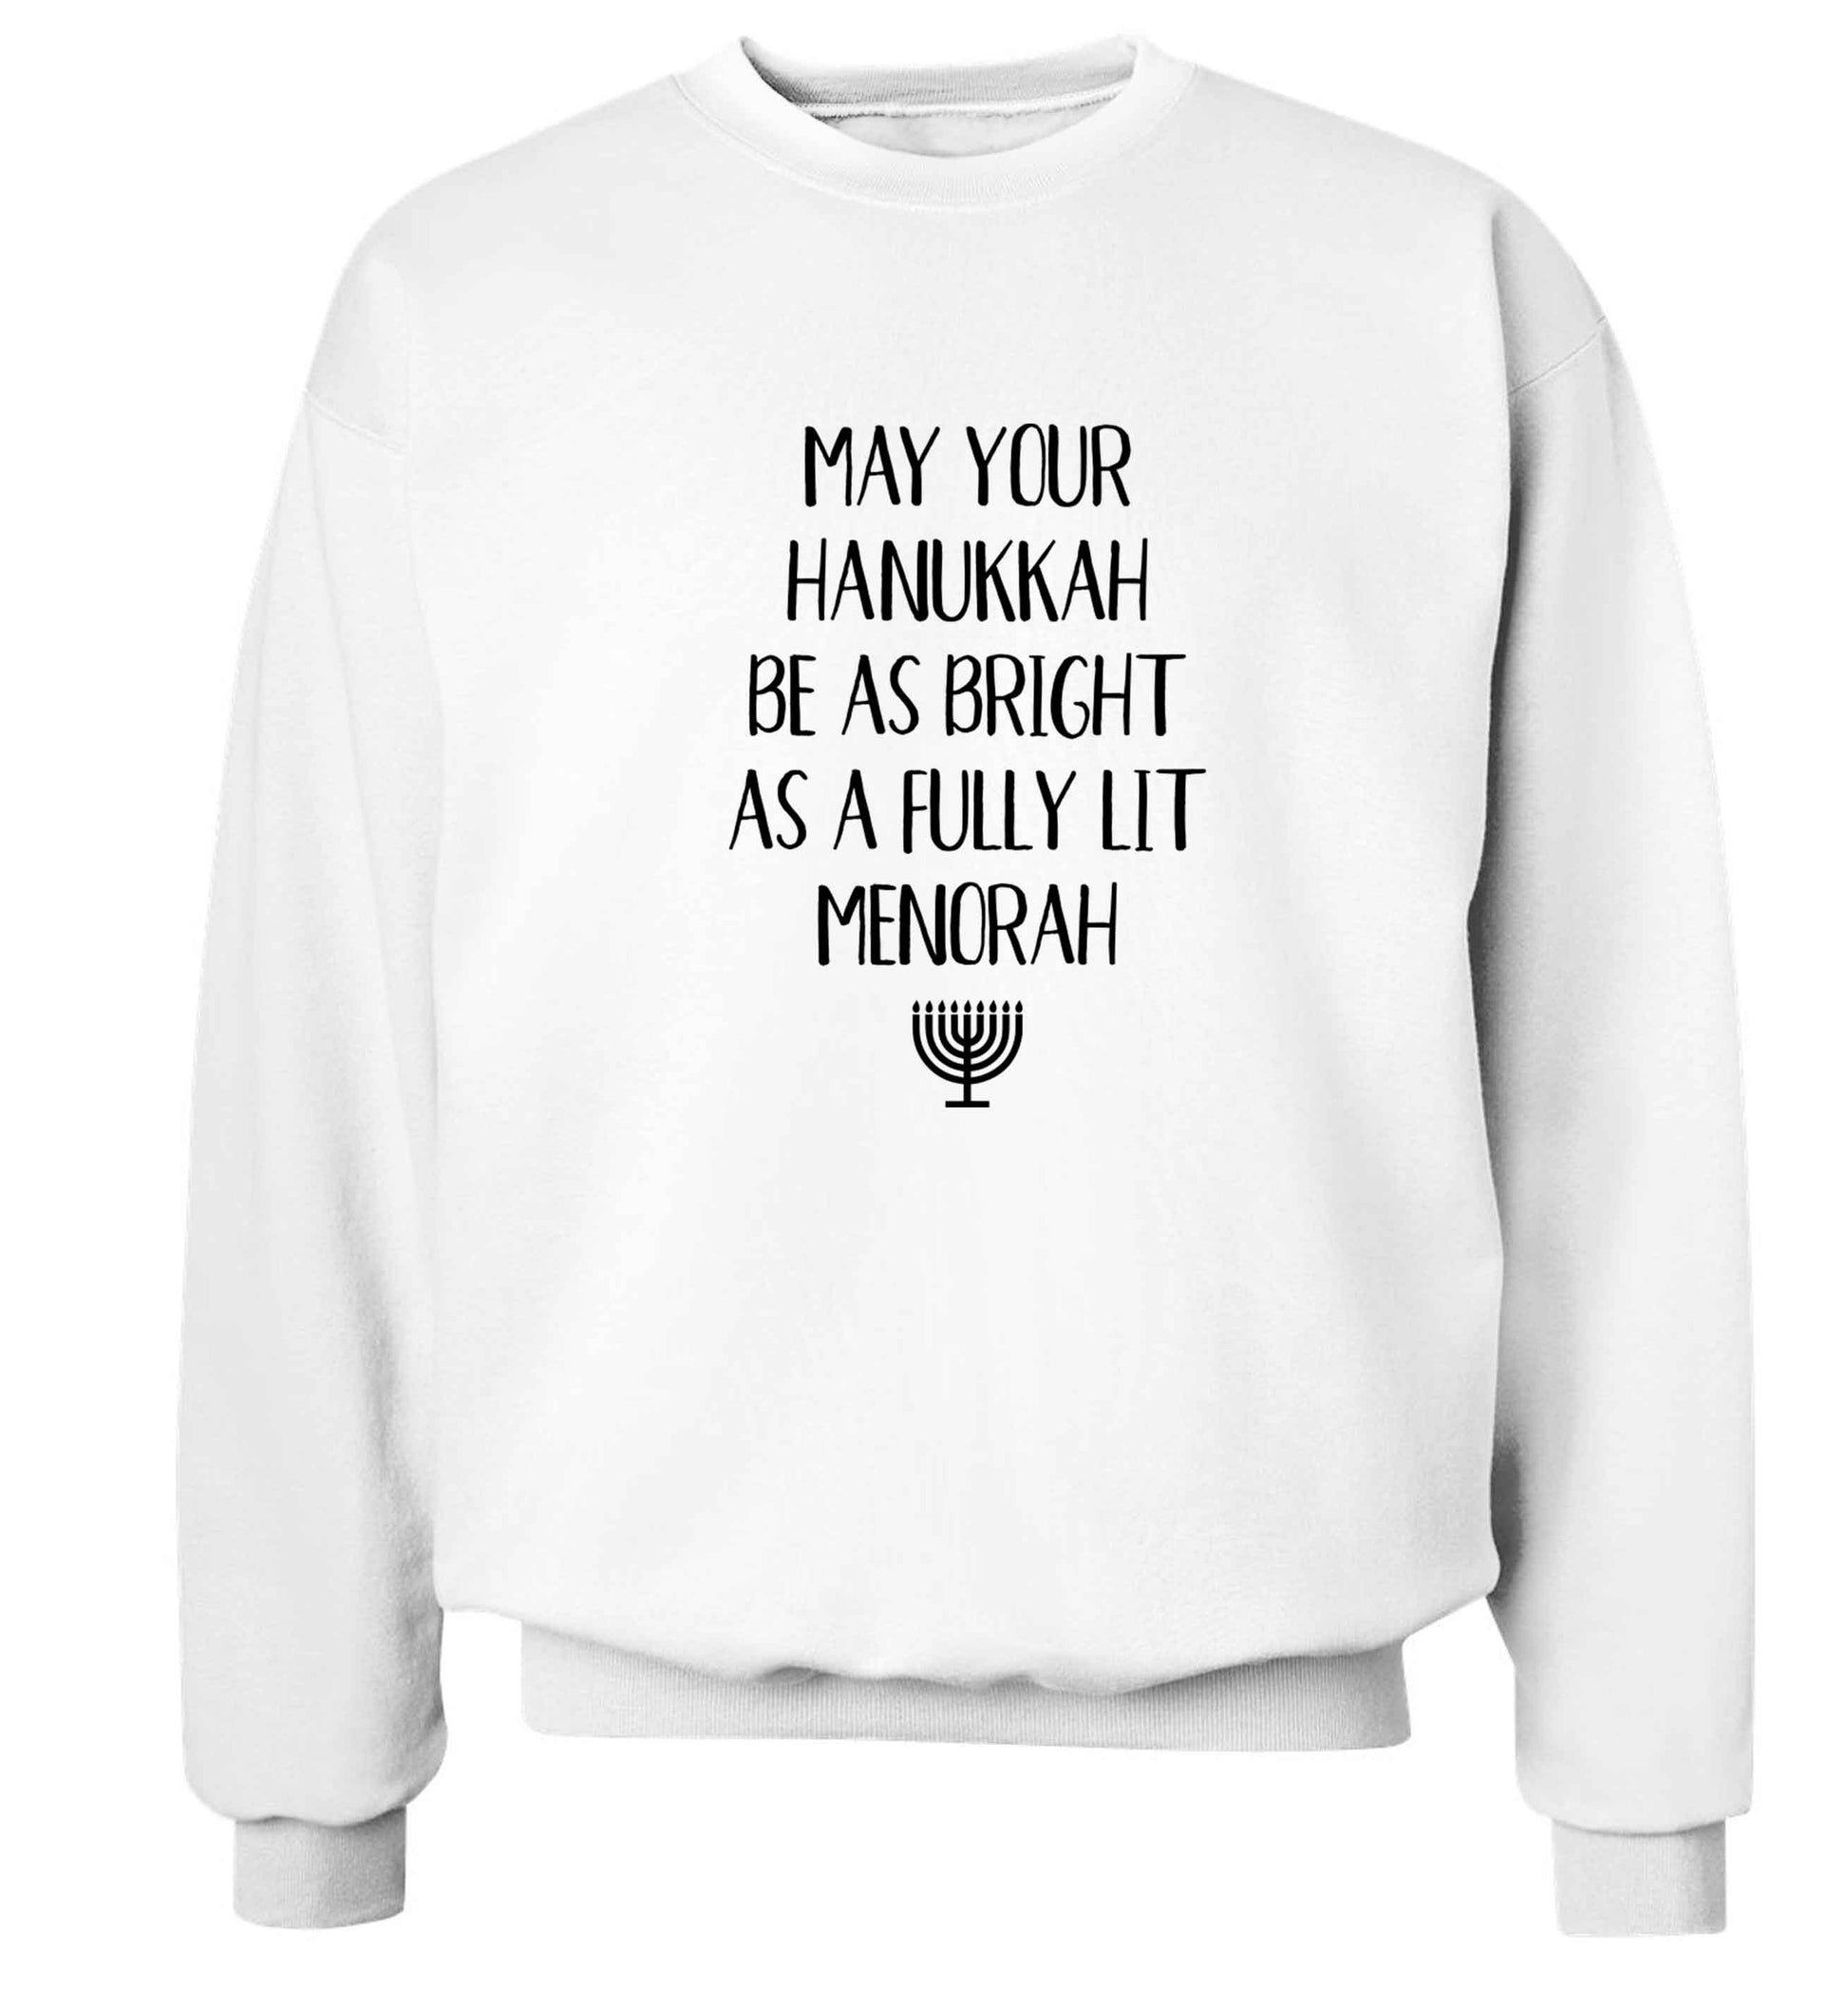 May your hanukkah be as bright as a fully lit menorah Adult's unisex white Sweater 2XL